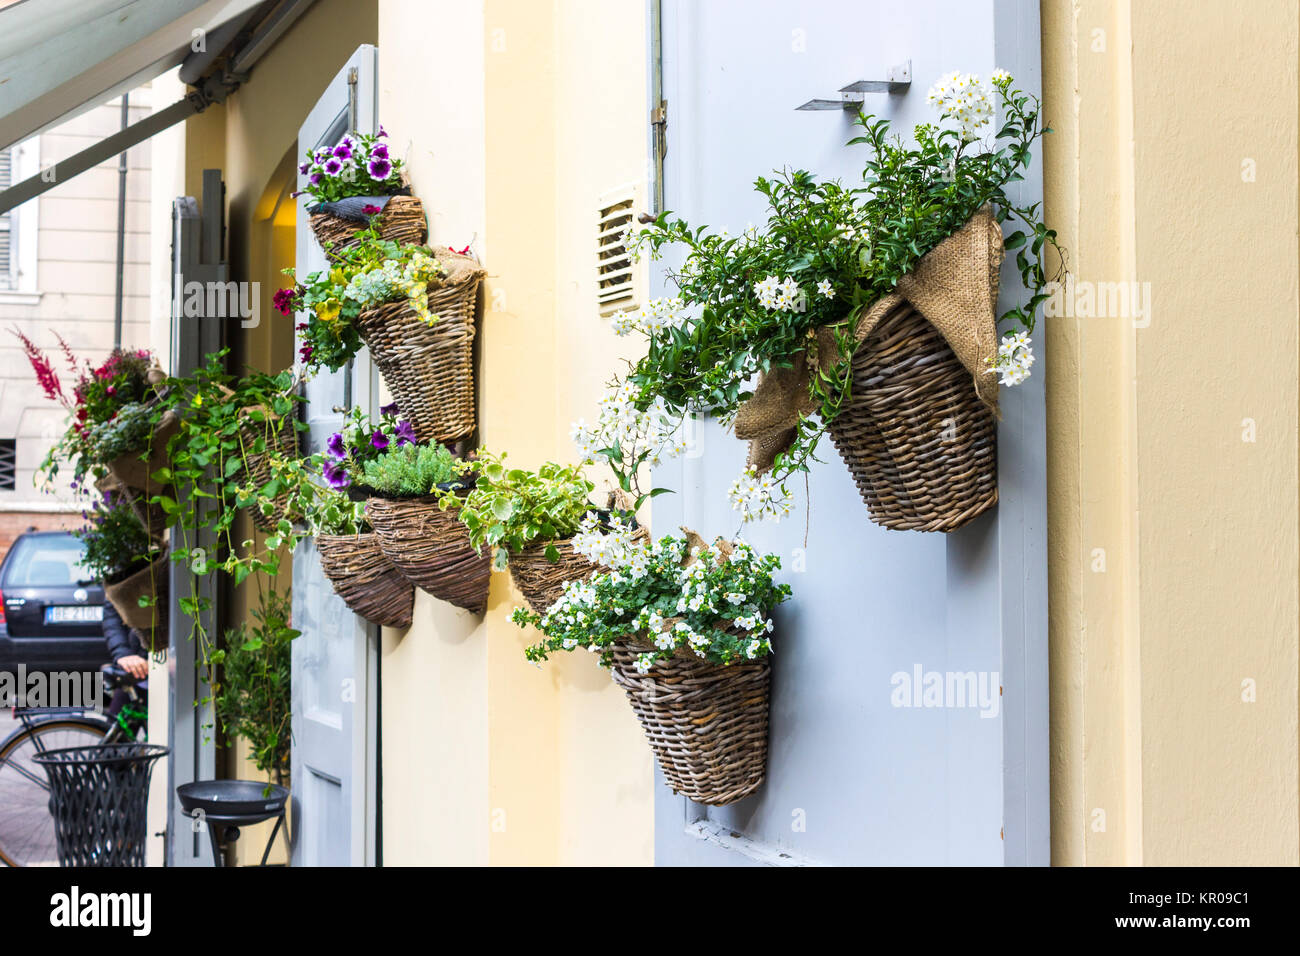 Flower pots hanging on the wall of a restaurant in Modena, Italy Stock Photo